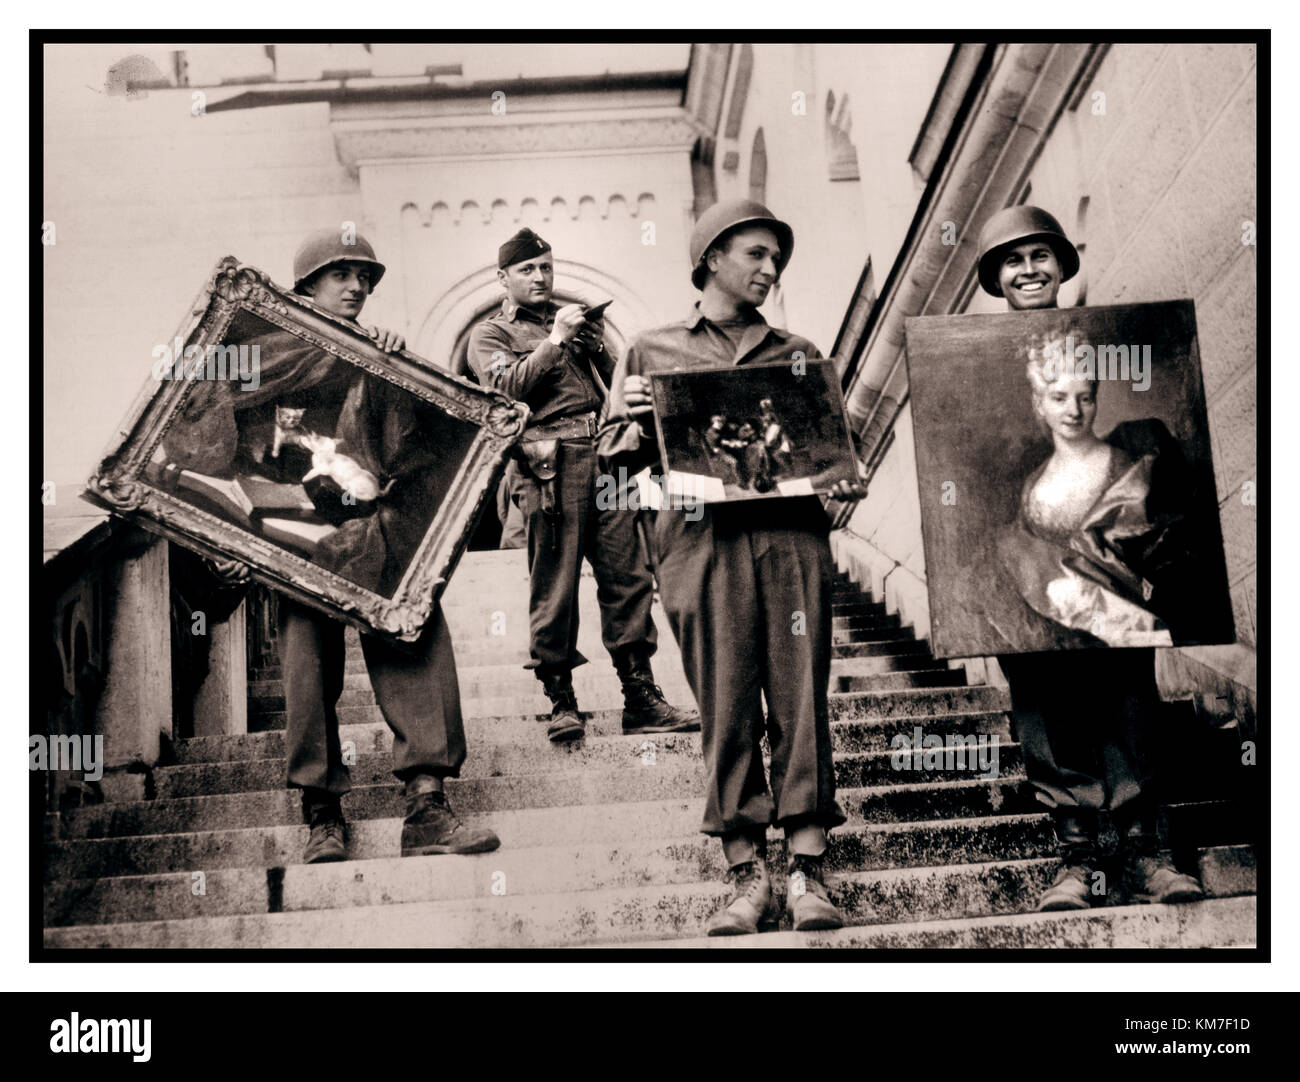 NAZI LOOT TREASURE WW2 1945 American Troops at Castle Schloss Neuschwanstein Bavaria removing works of art looted stolen by the Nazis during World War 2  Captain James Lorimer (2nd from left) played a central role in safekeeping identifying and returning Stock Photo